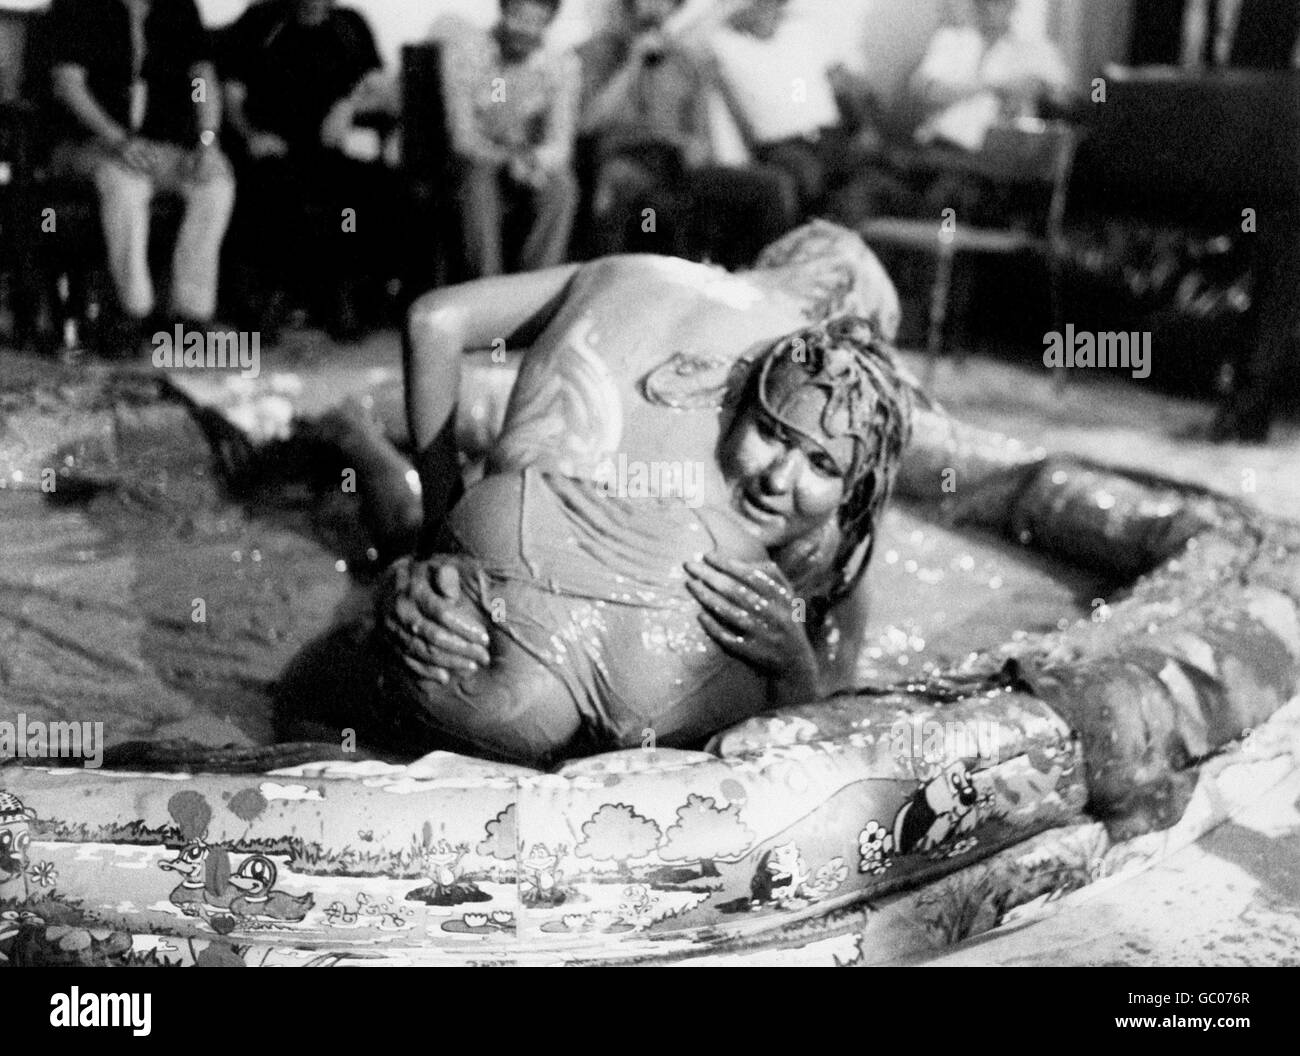 Mud Wrestling. Two female mud wrestlers get to grips with each other in a paddling pool Stock Photo